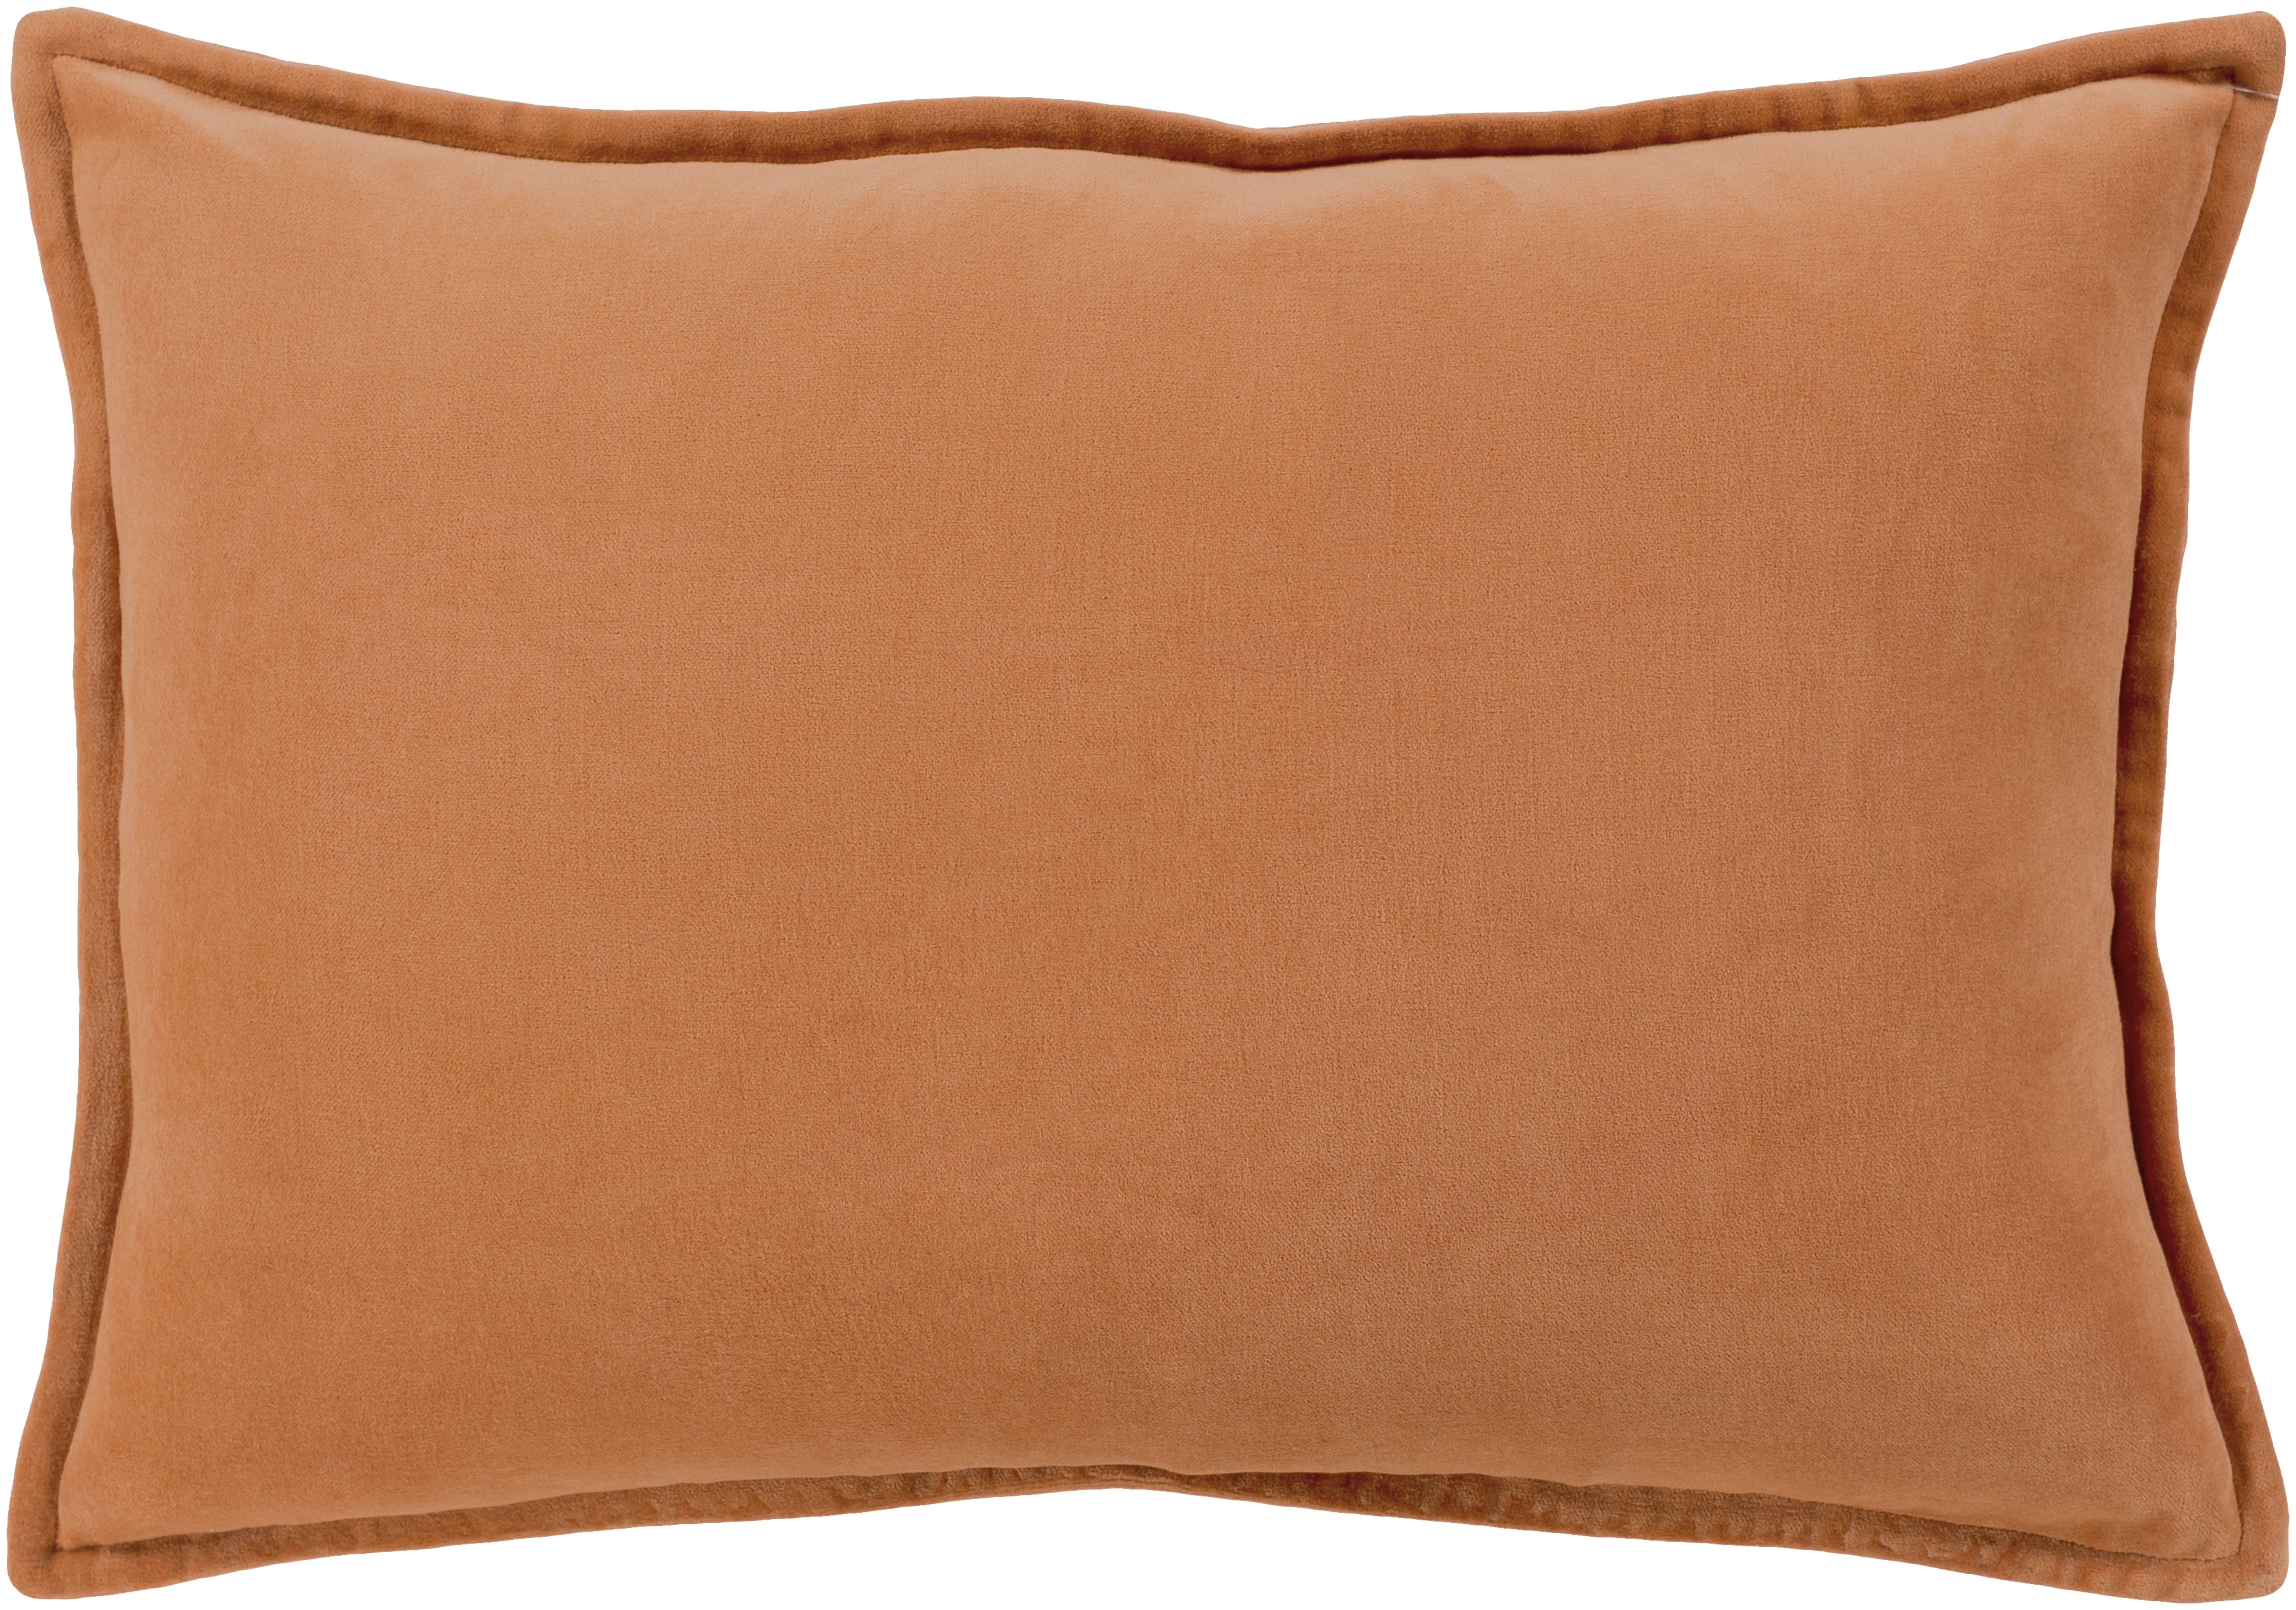 Cotton Velvet Throw Pillow, Small, pillow cover only - Surya